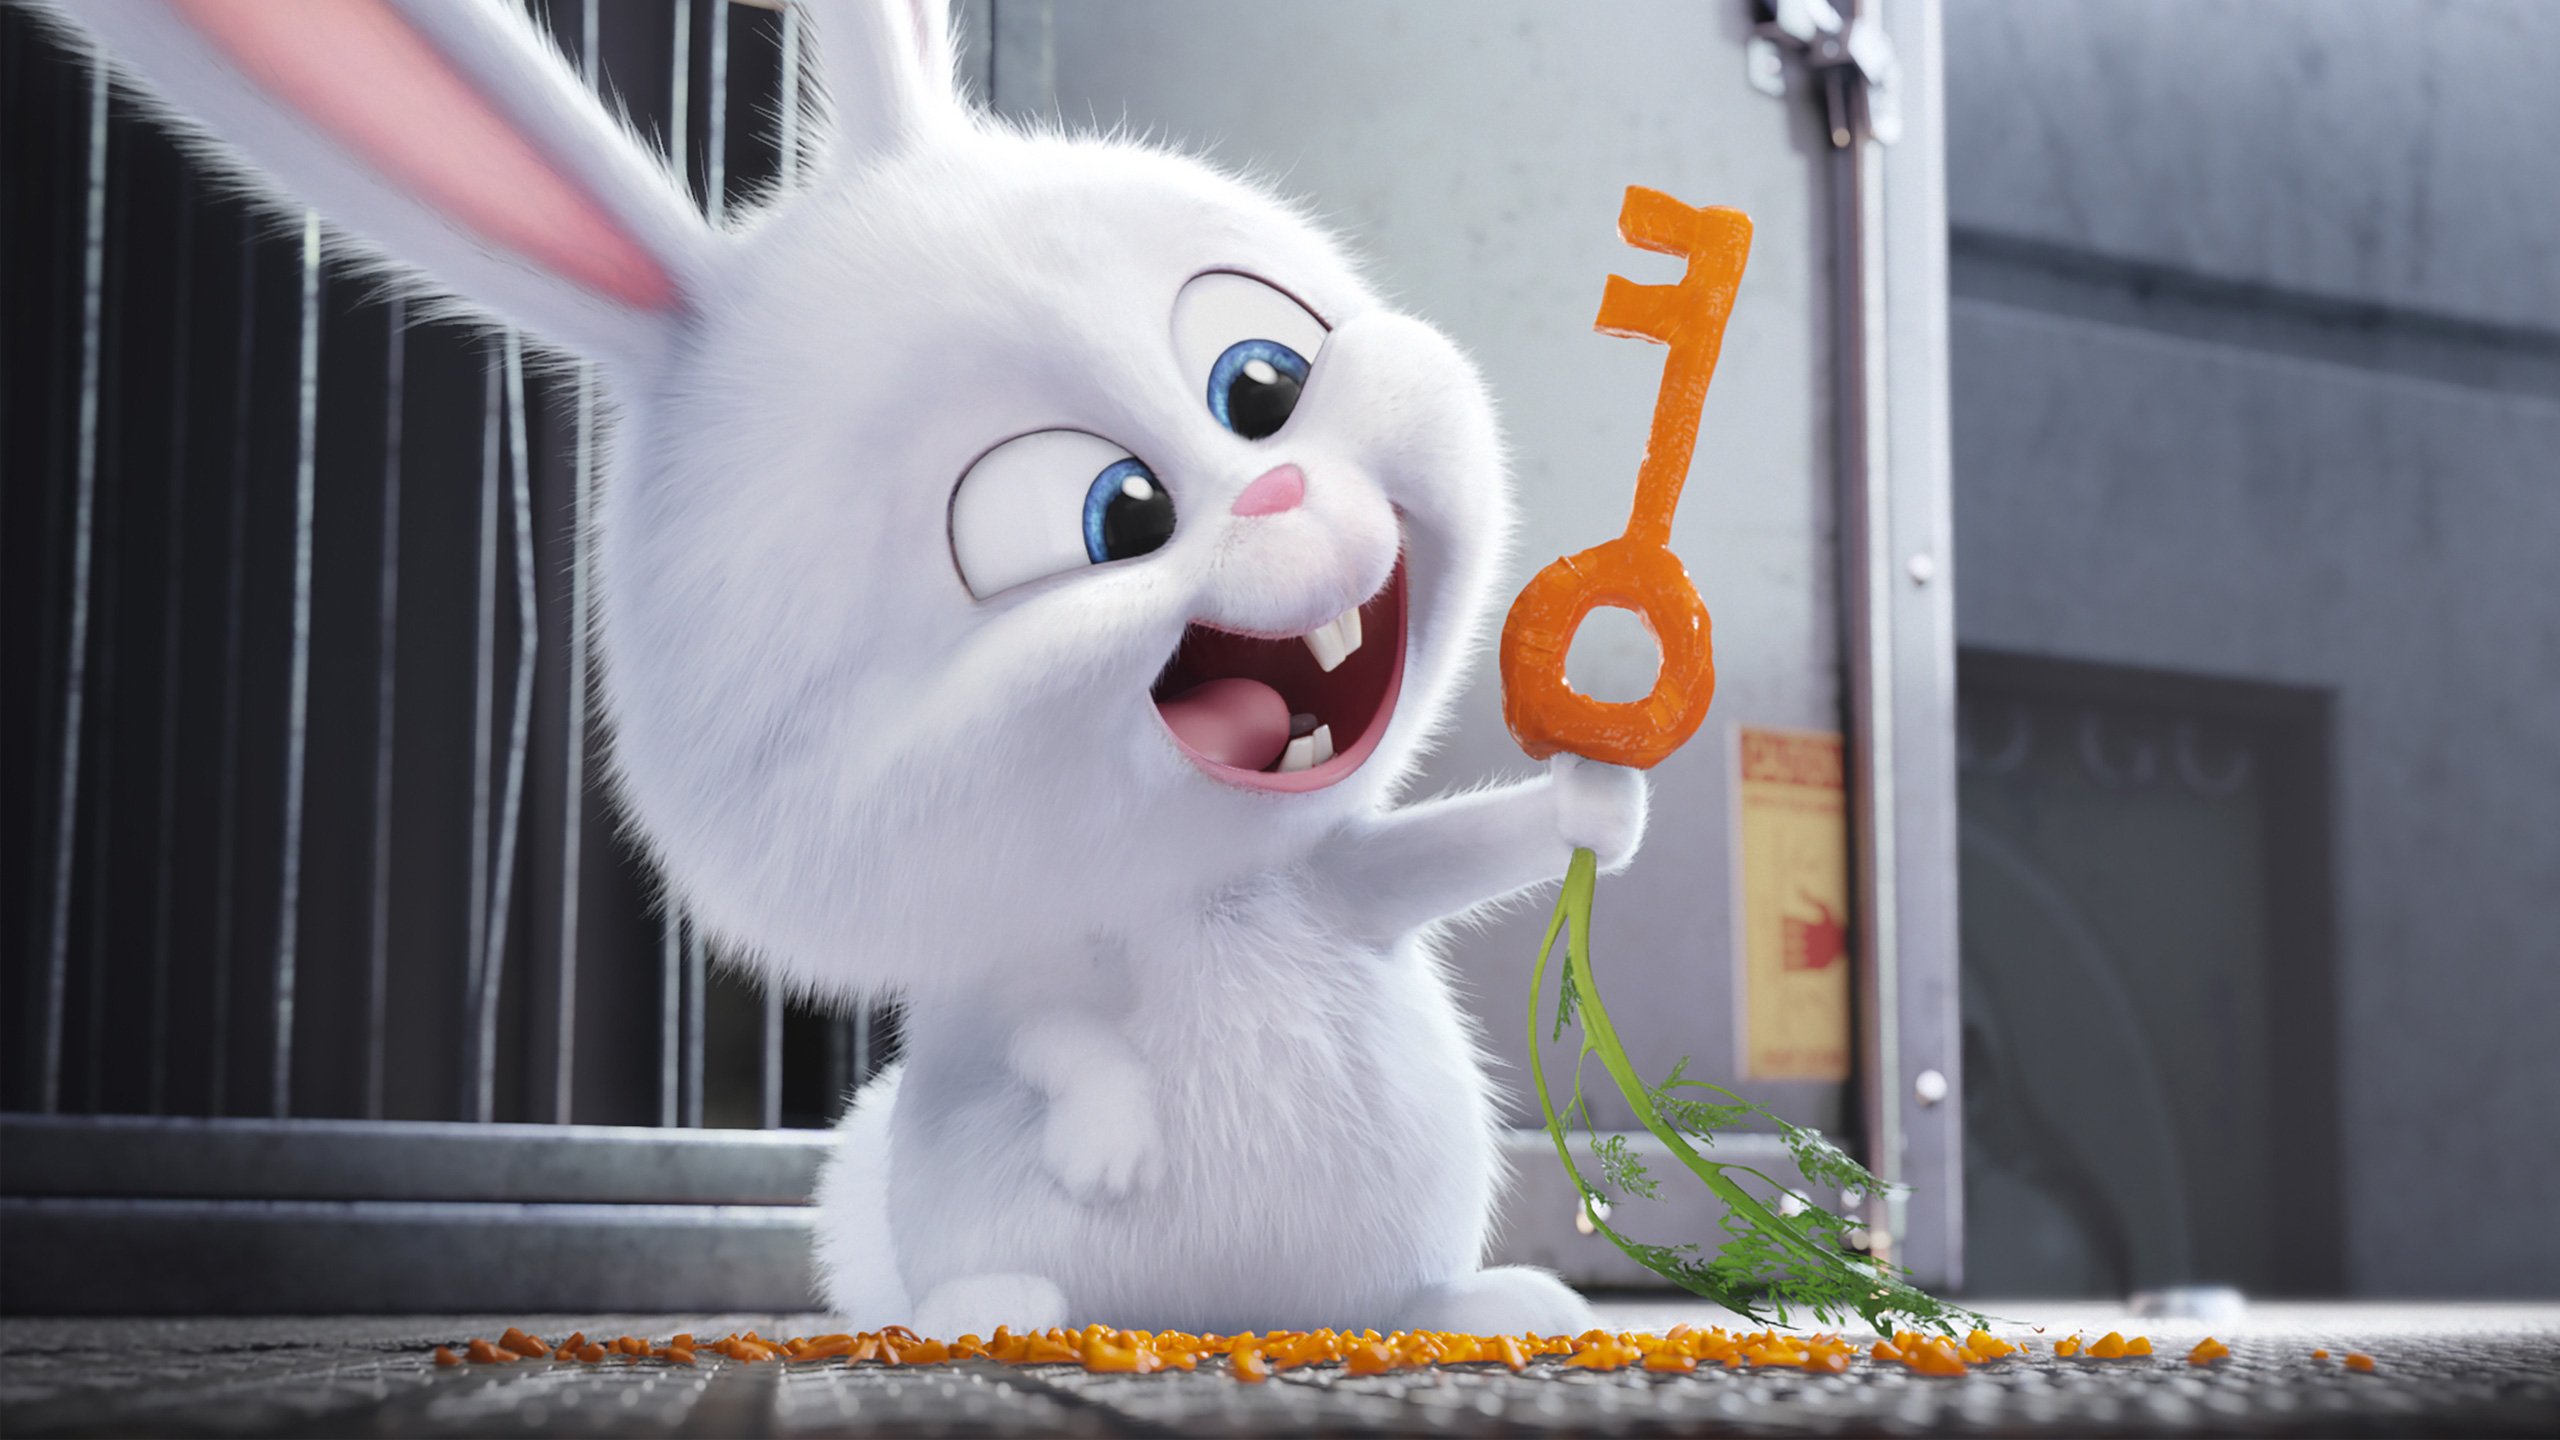 Snowball The Secret Life of Pets Wallpapers HD Wallpapers 2560x1440